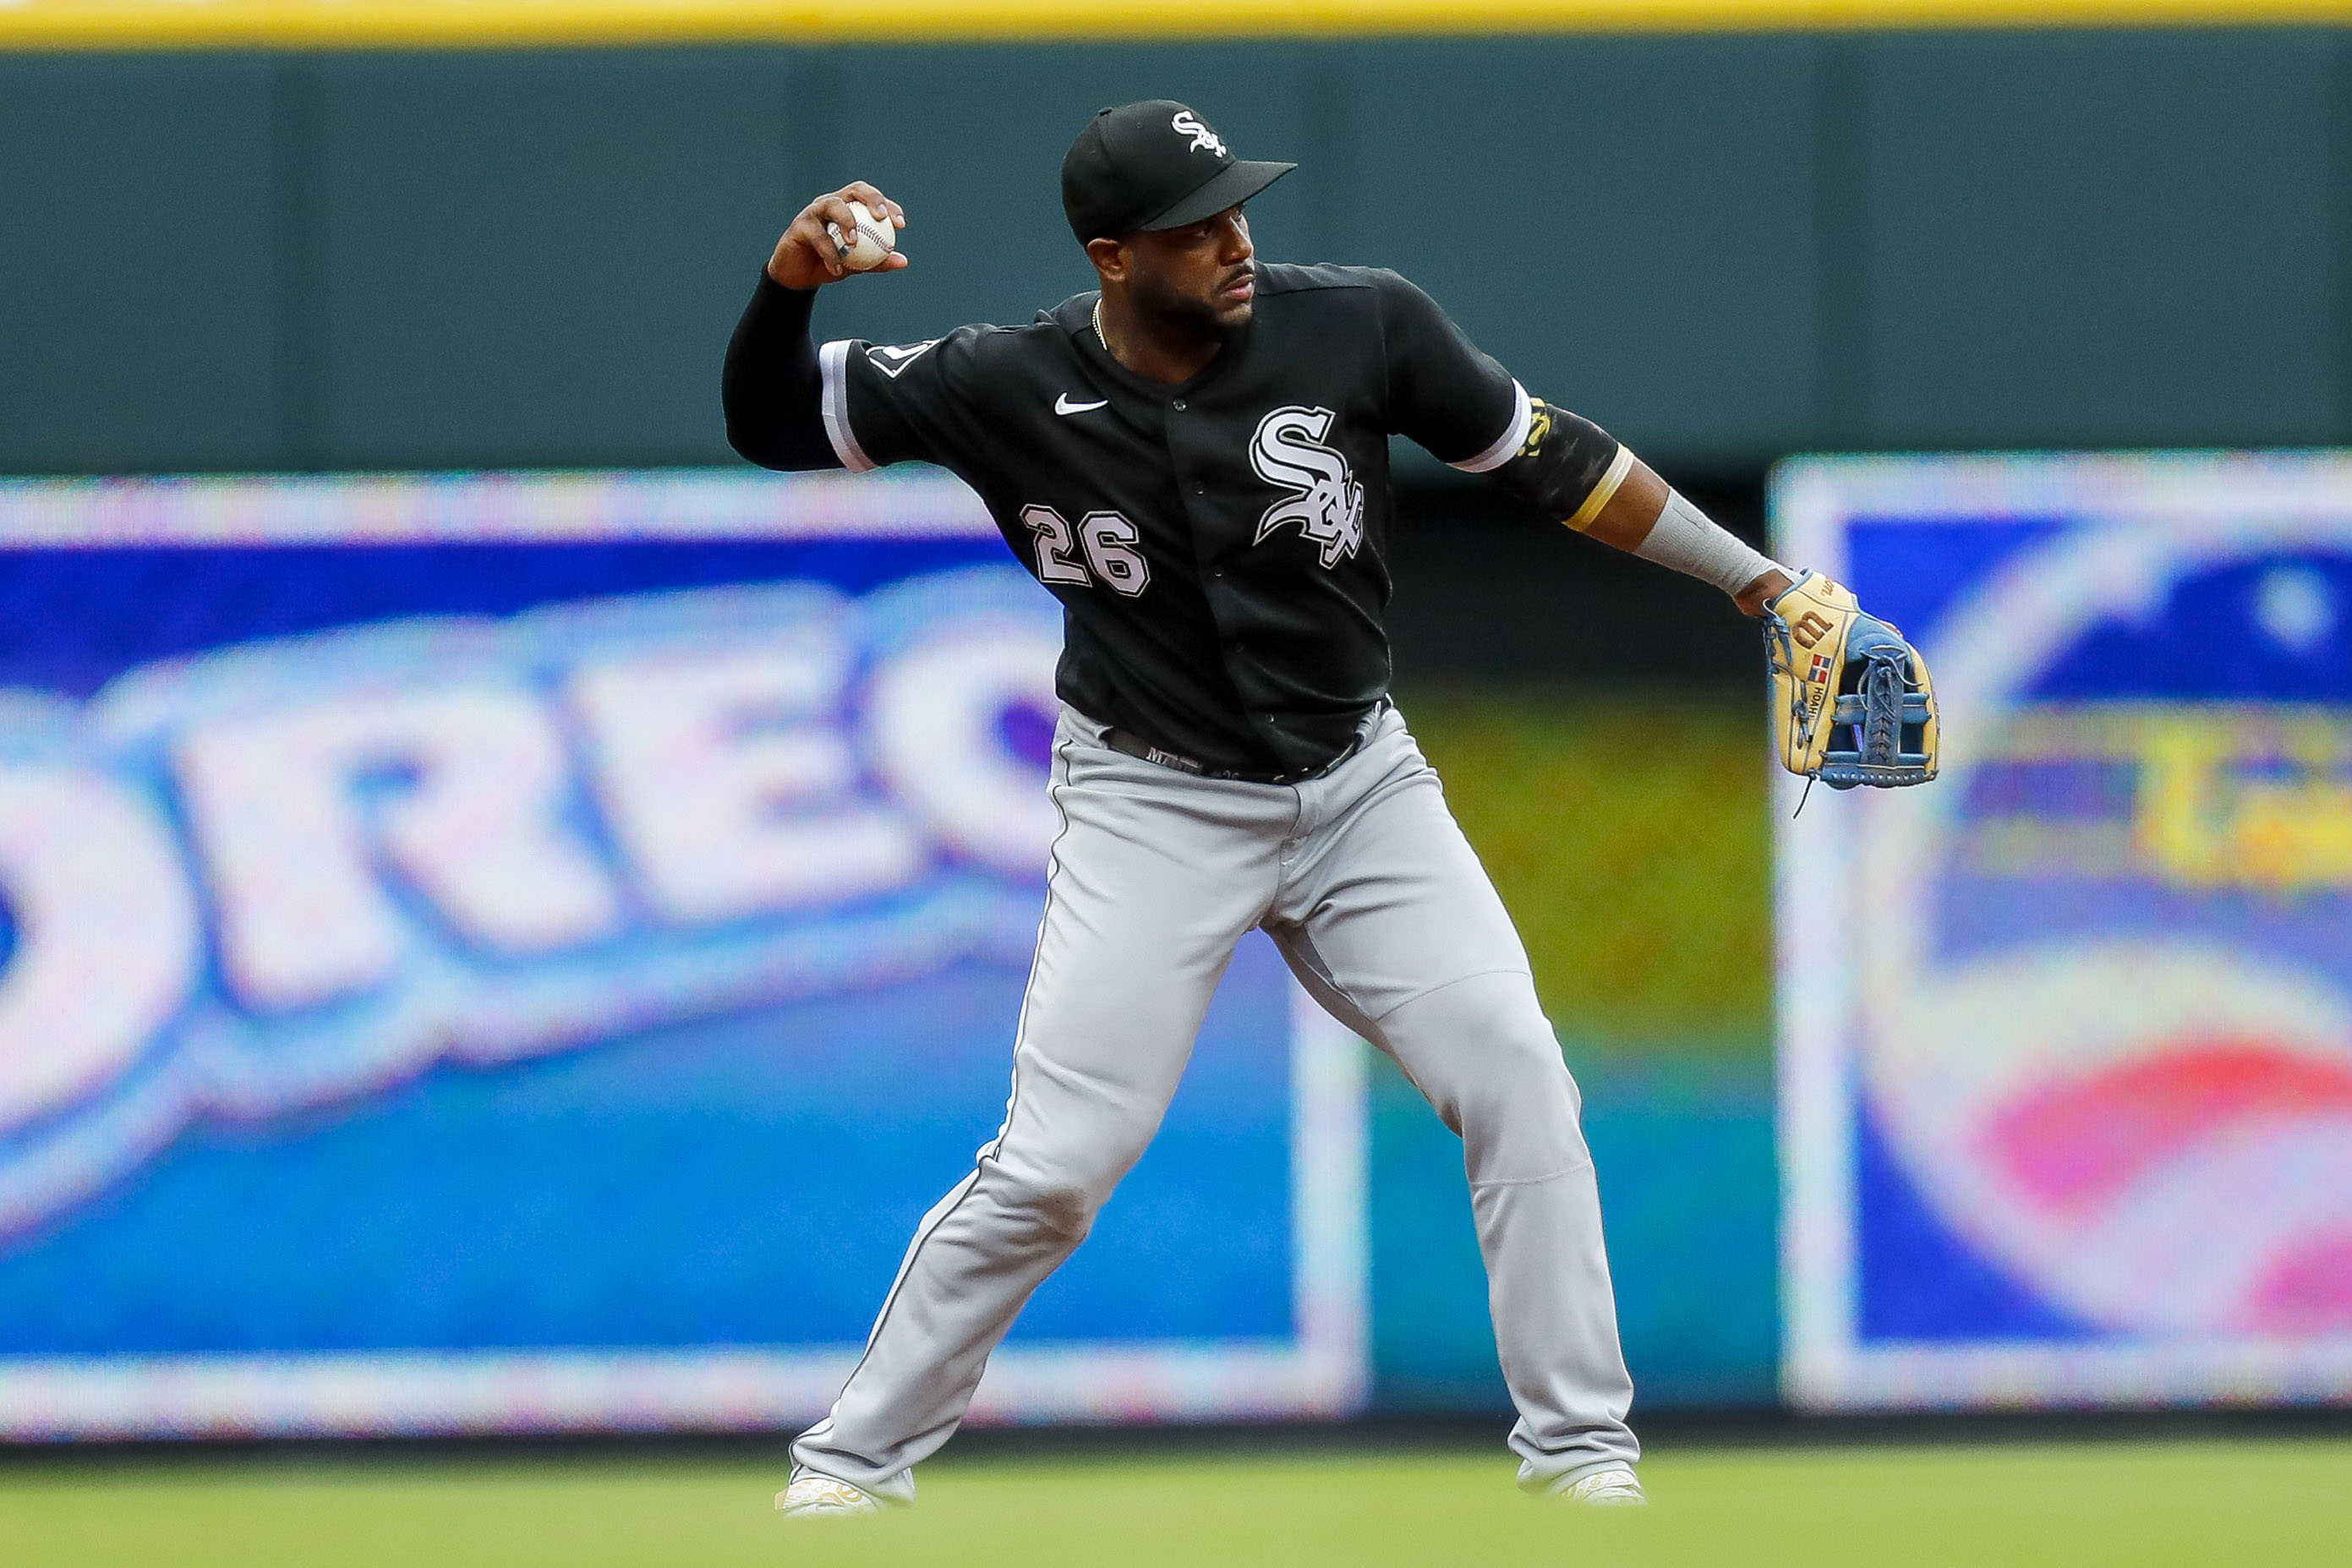 White Sox score 11 in 2nd inning, go on to dominate Reds